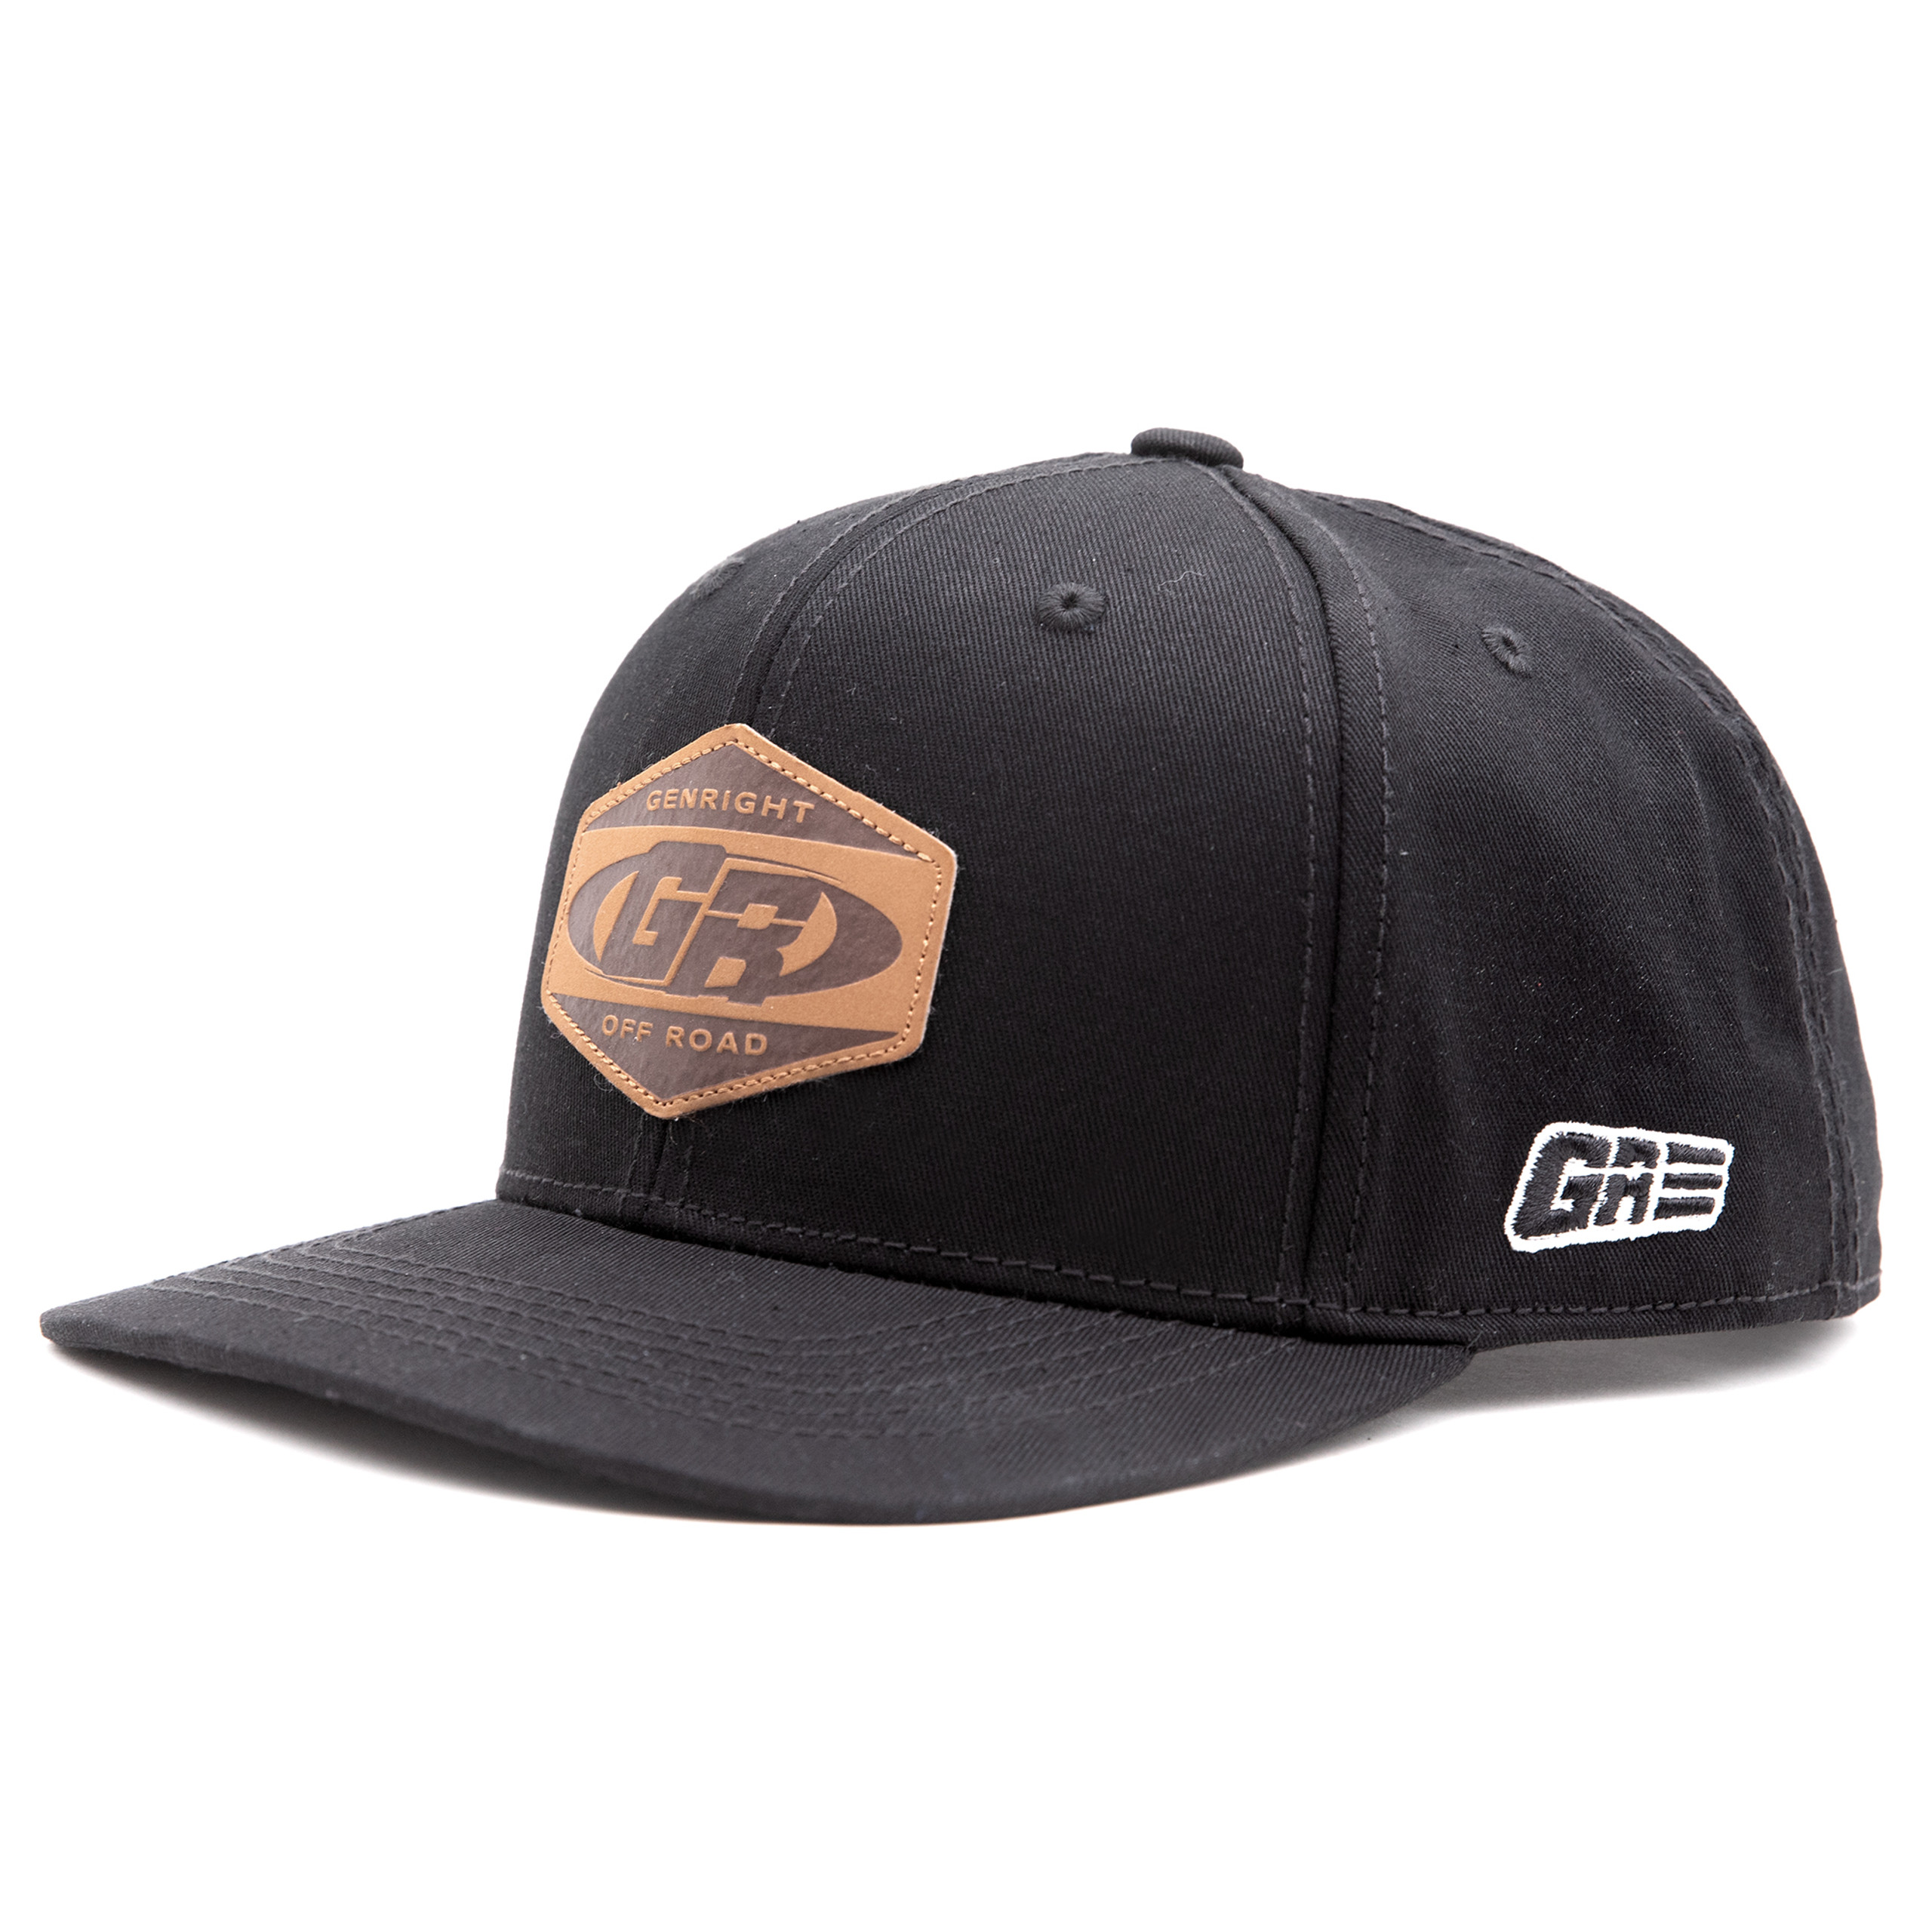 GenRight Limited Edition Leather Patch Snapback Hat | GenRight Off Road